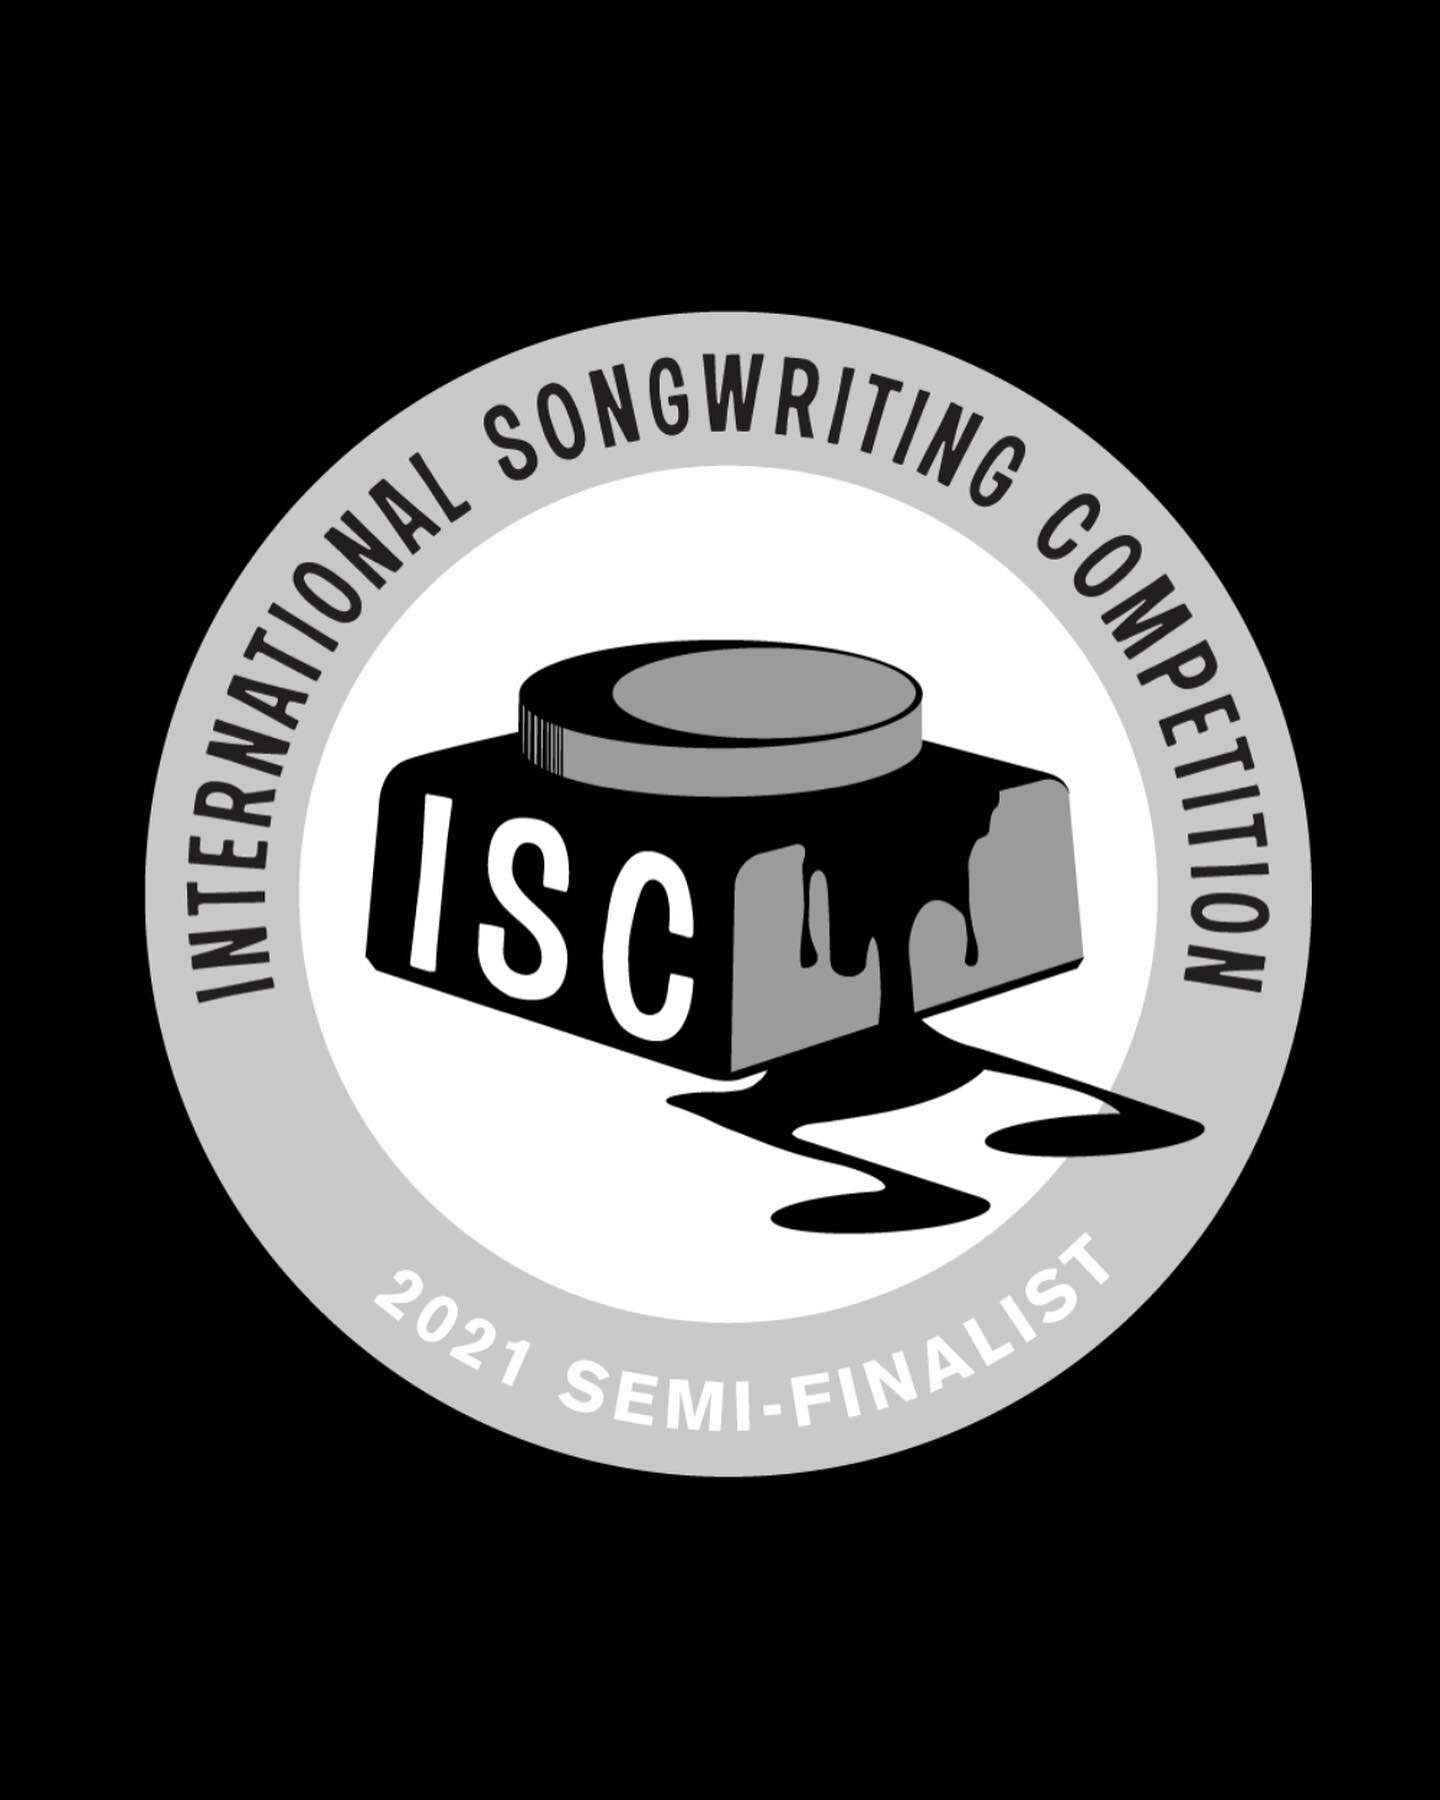 !!!!! What?!? 😱 so excited!!! Thank you @intlsongcomp !!!! My song &ldquo;Break&rdquo; was selected as a semi-finalist in the 2021 International Songwriting Competition (ISC)! Soli deo Gloria 🙌

Special thanks to @jsp8 for his incredible production